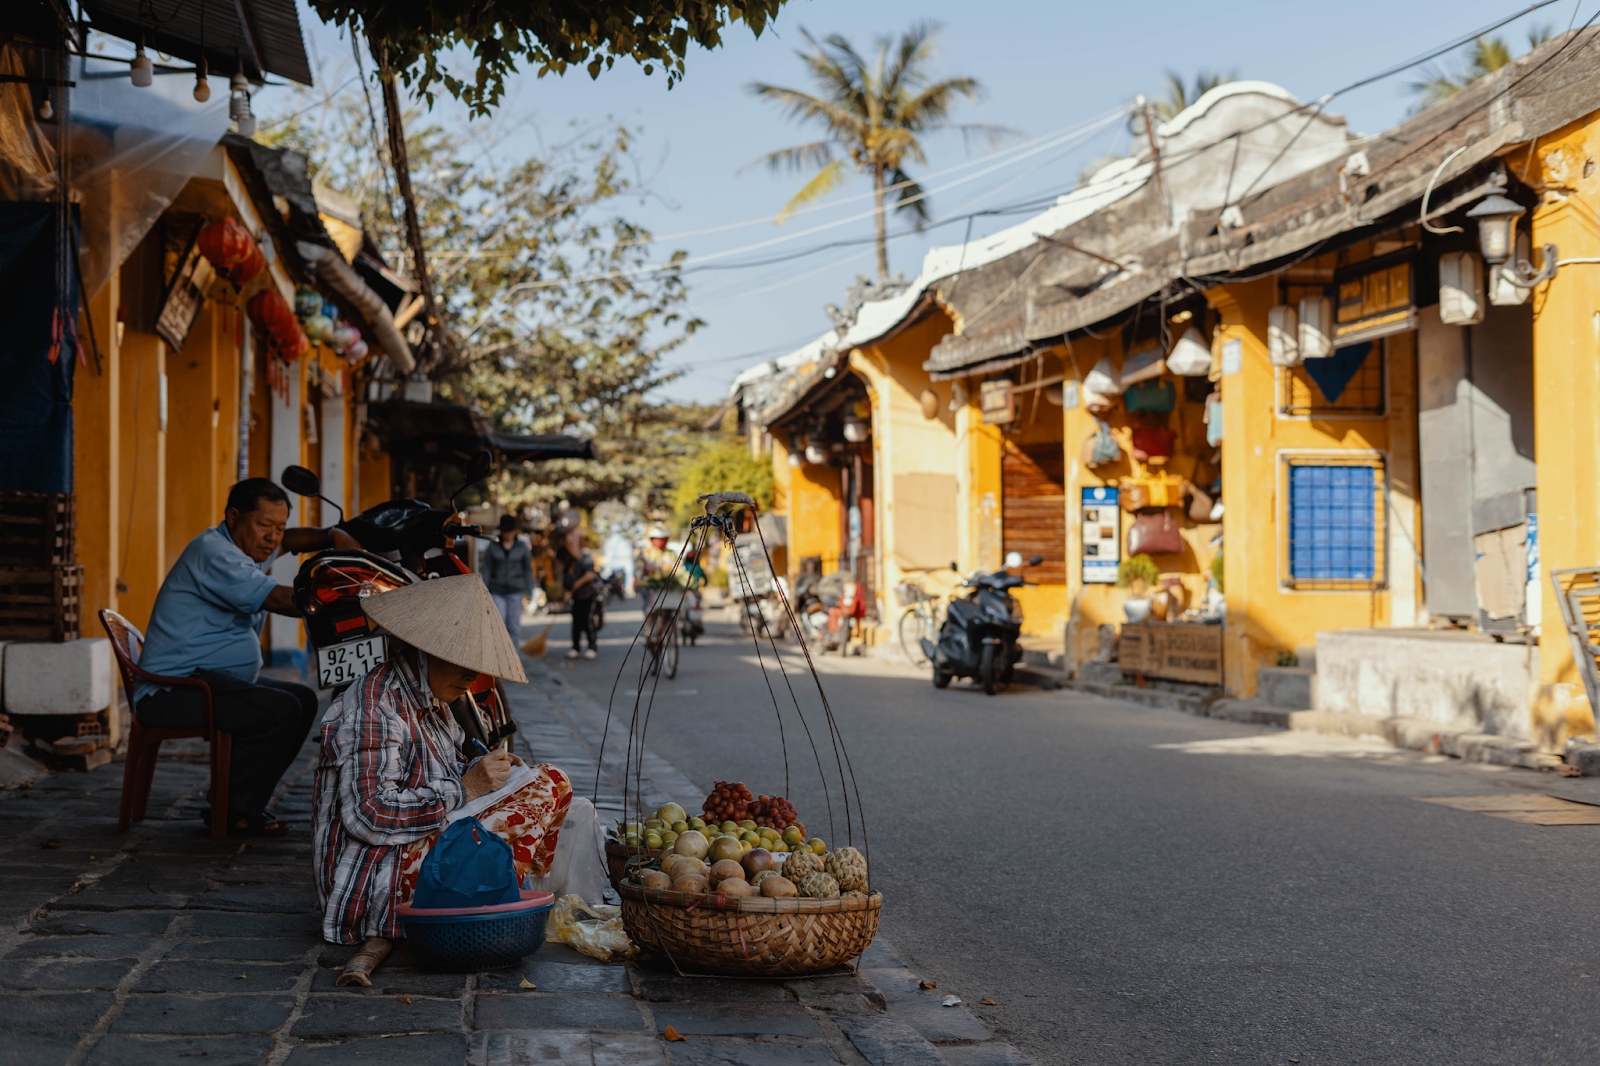 The Ancient City of Hoi An